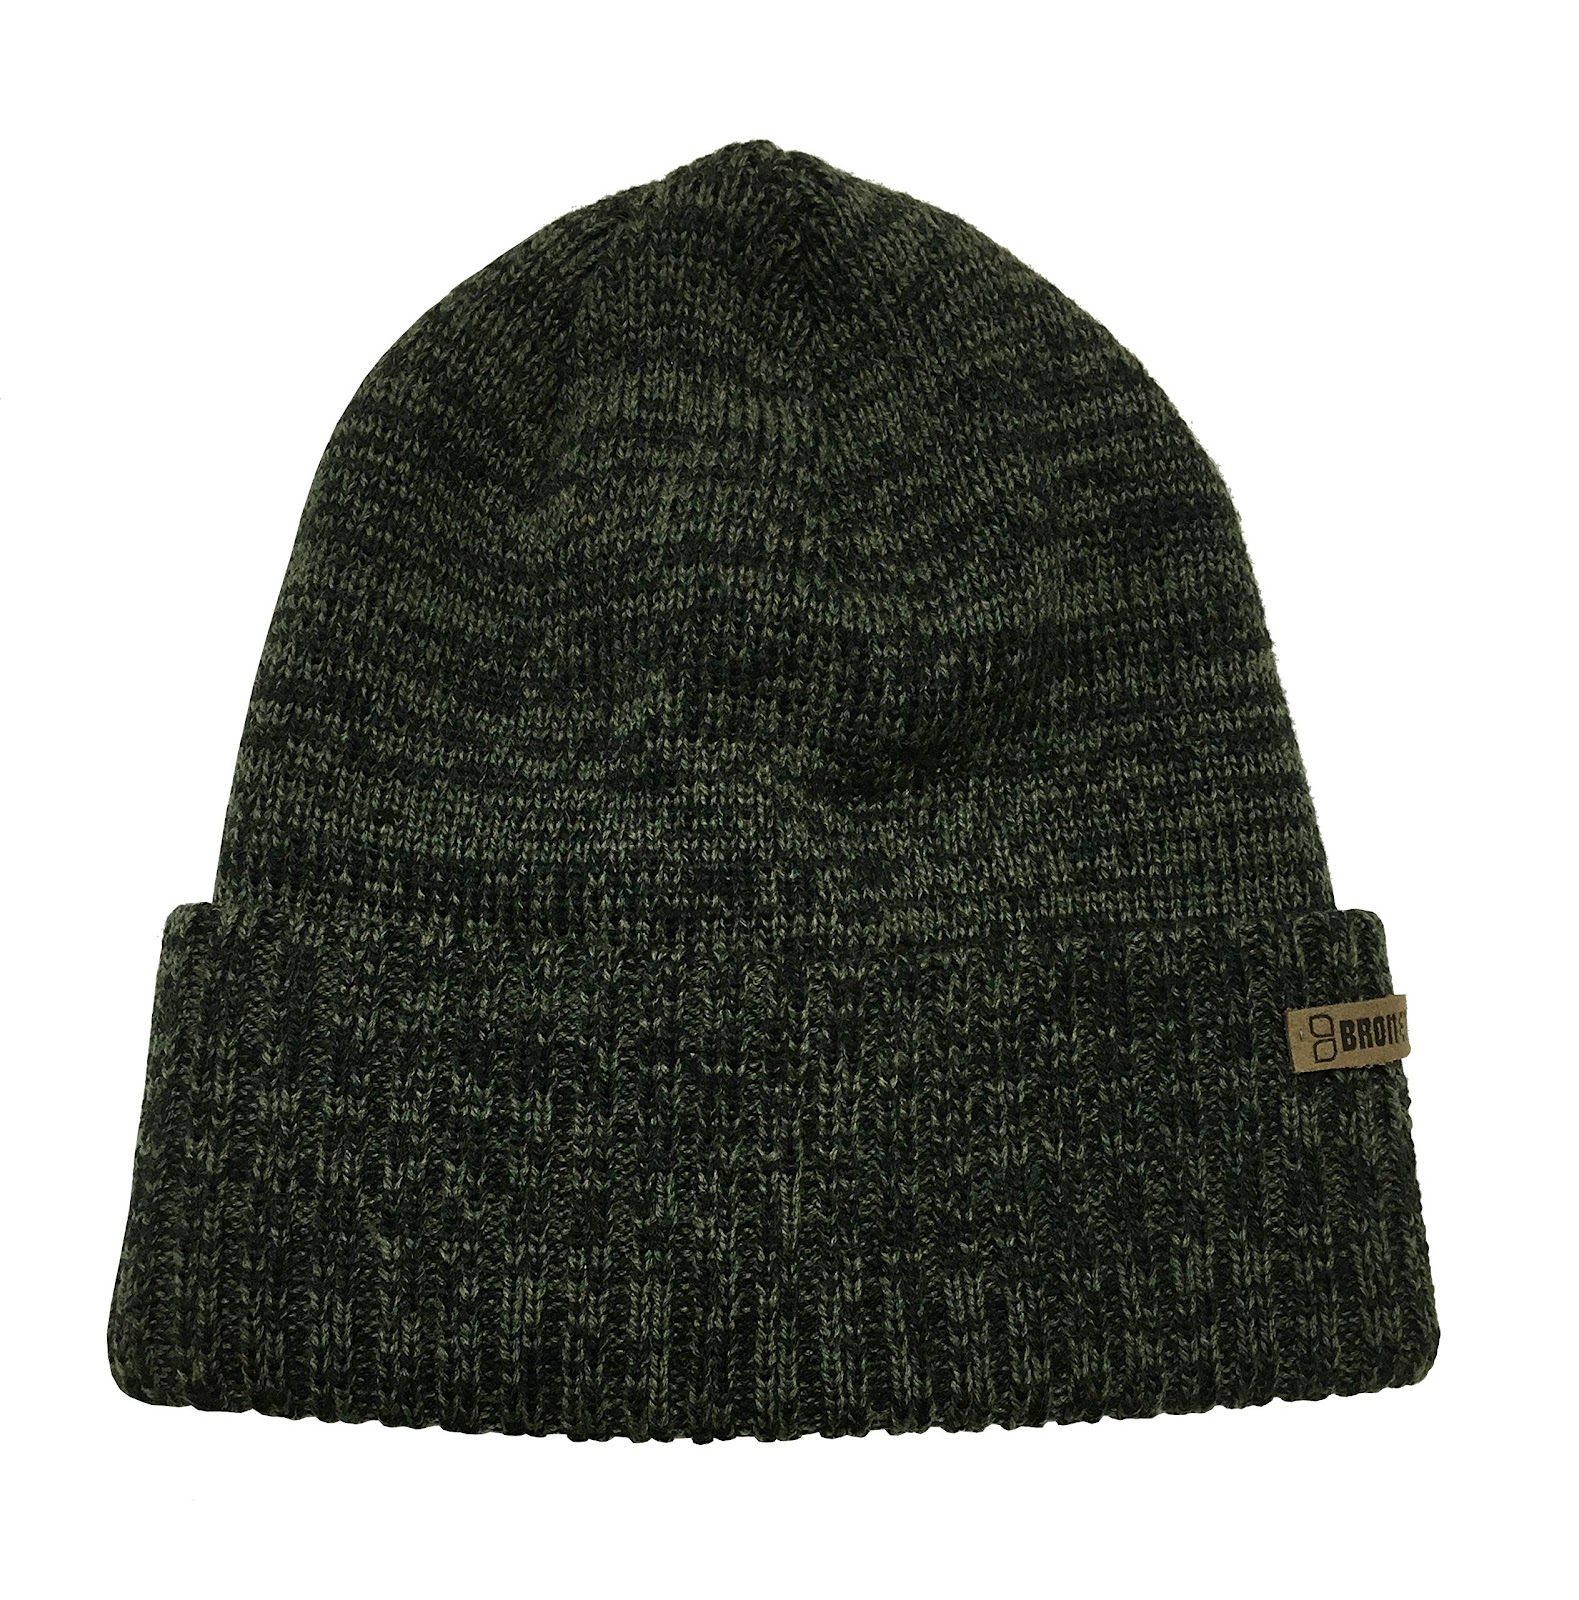 Broner Eco-Friendly Sustainable Acrylic Knit Cap with Rib Knit Cuff Black/Olive